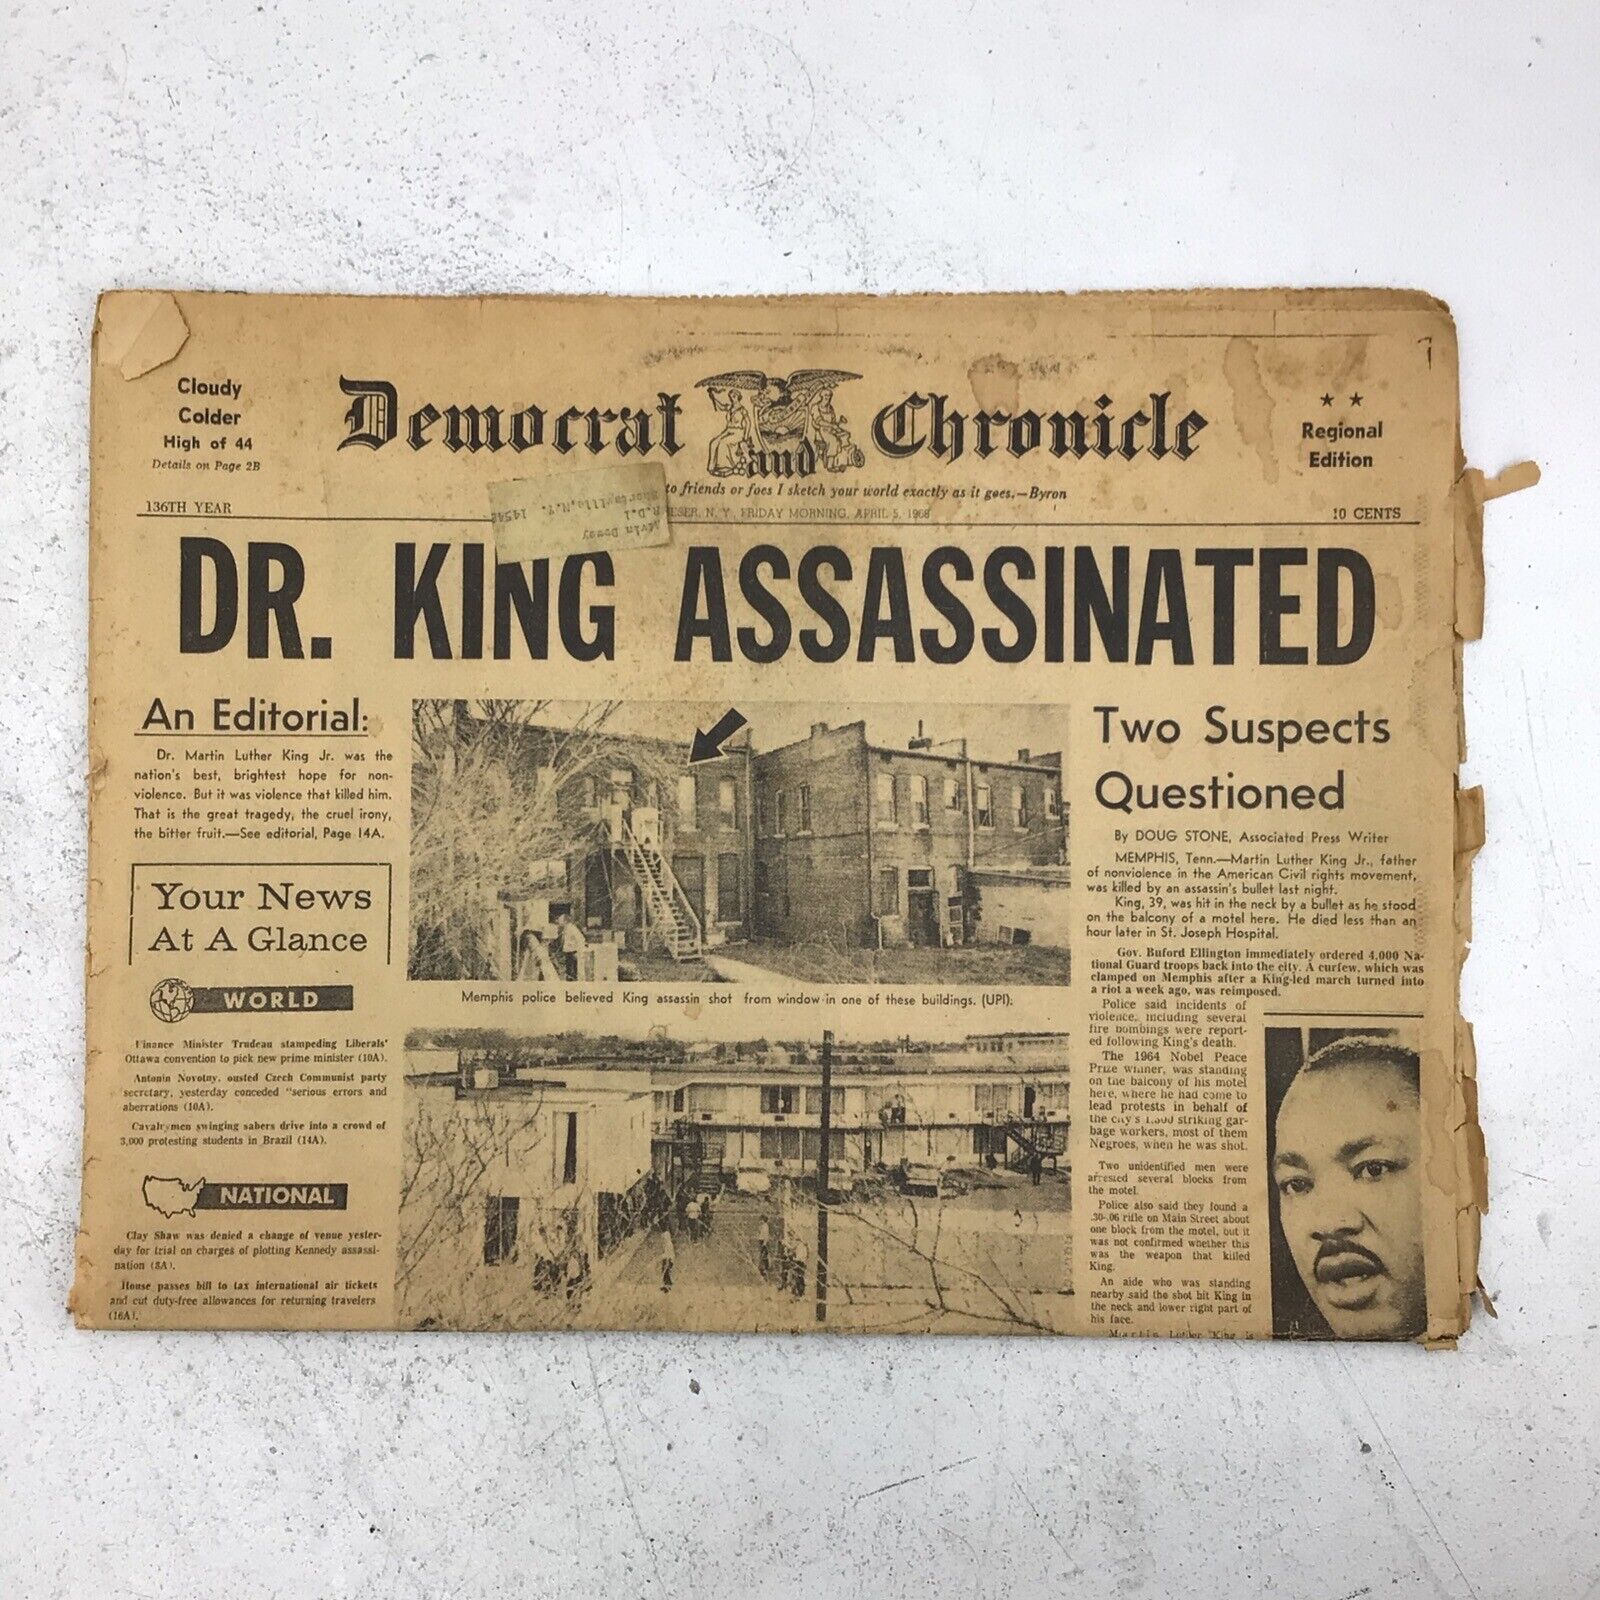 Martin Luther King Assassinated Democrat and Chronicle April 5th 1968 Newspaper